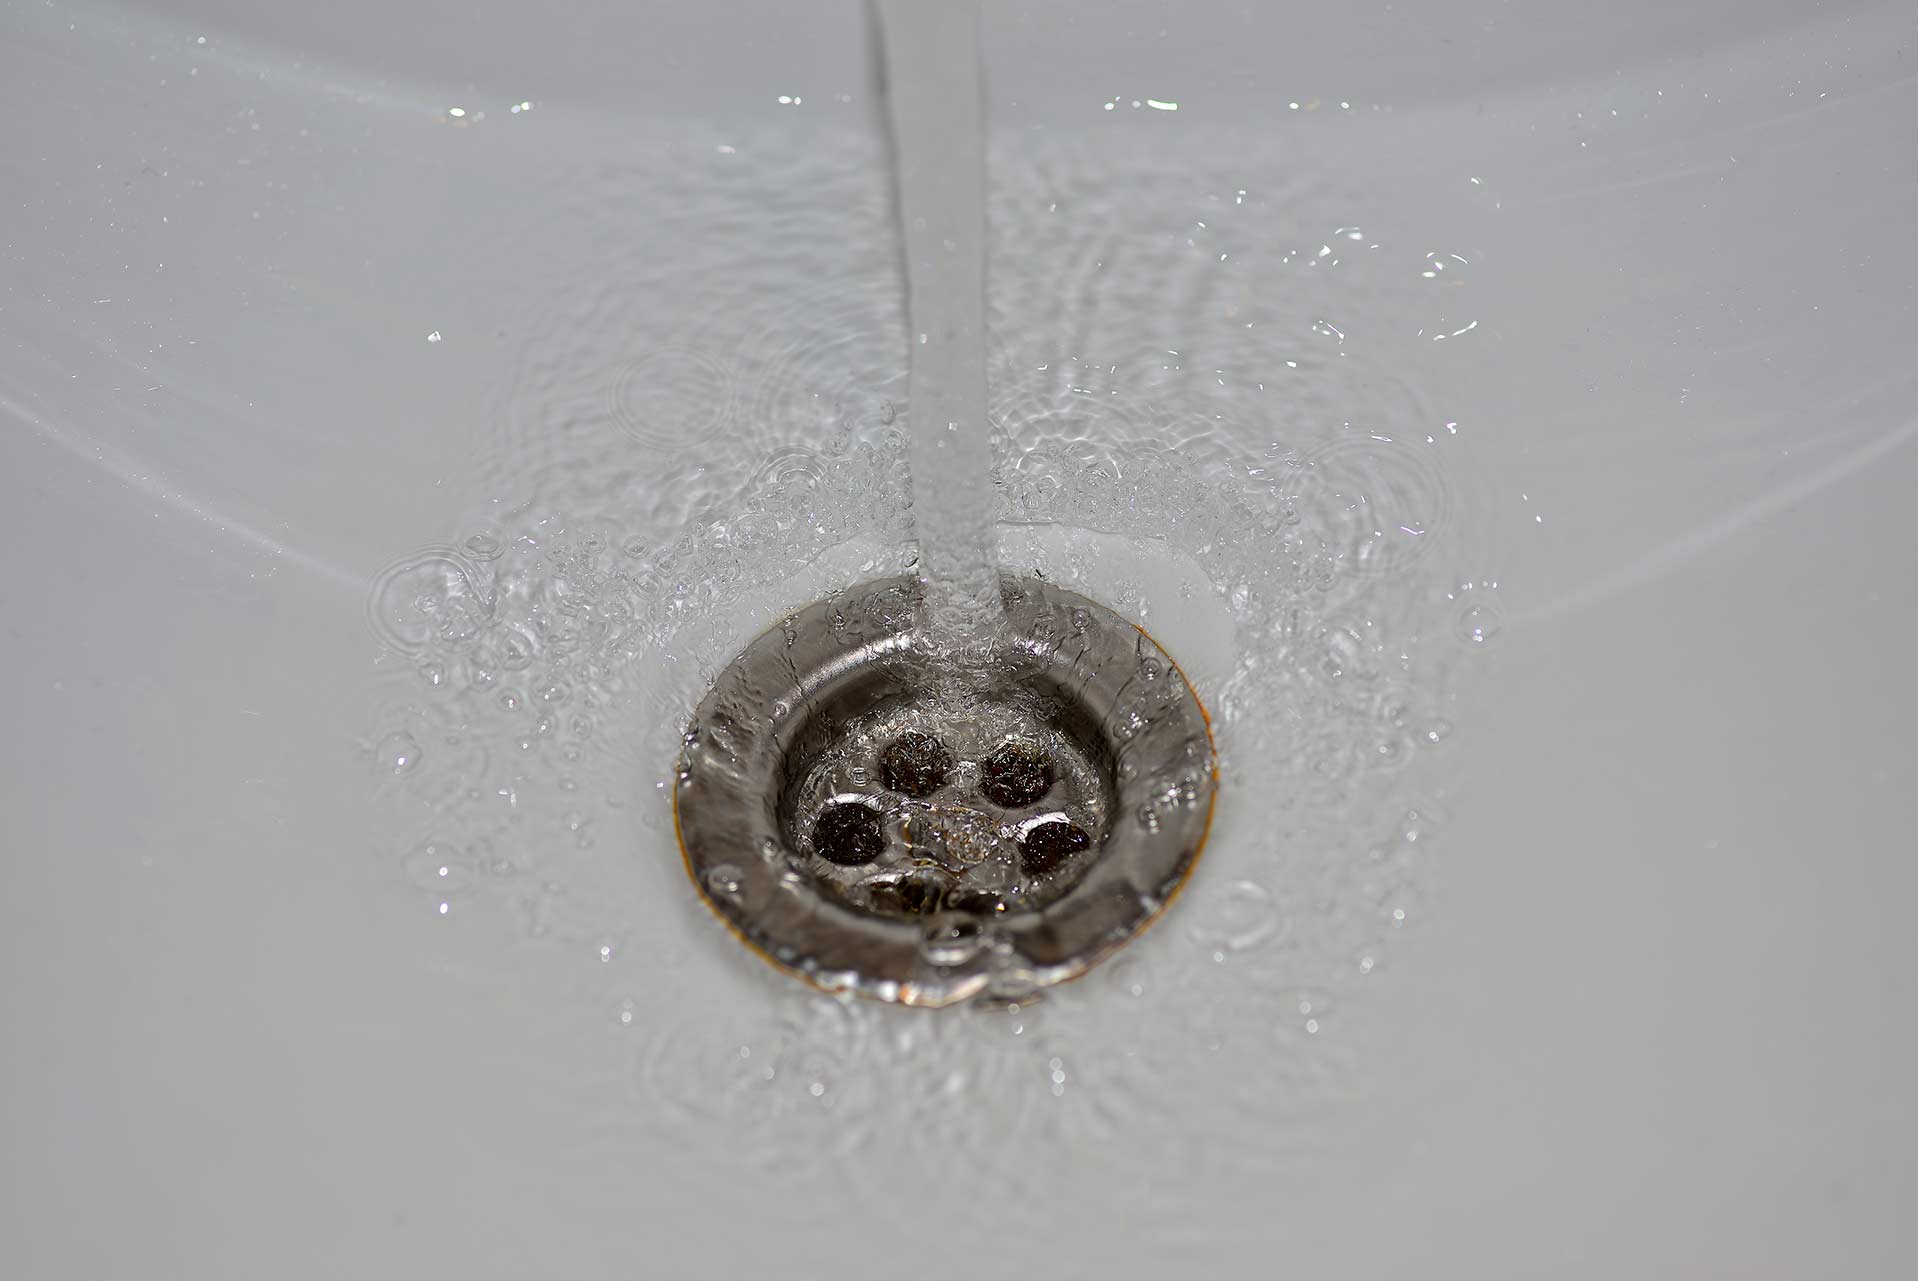 A2B Drains provides services to unblock blocked sinks and drains for properties in Altrincham.